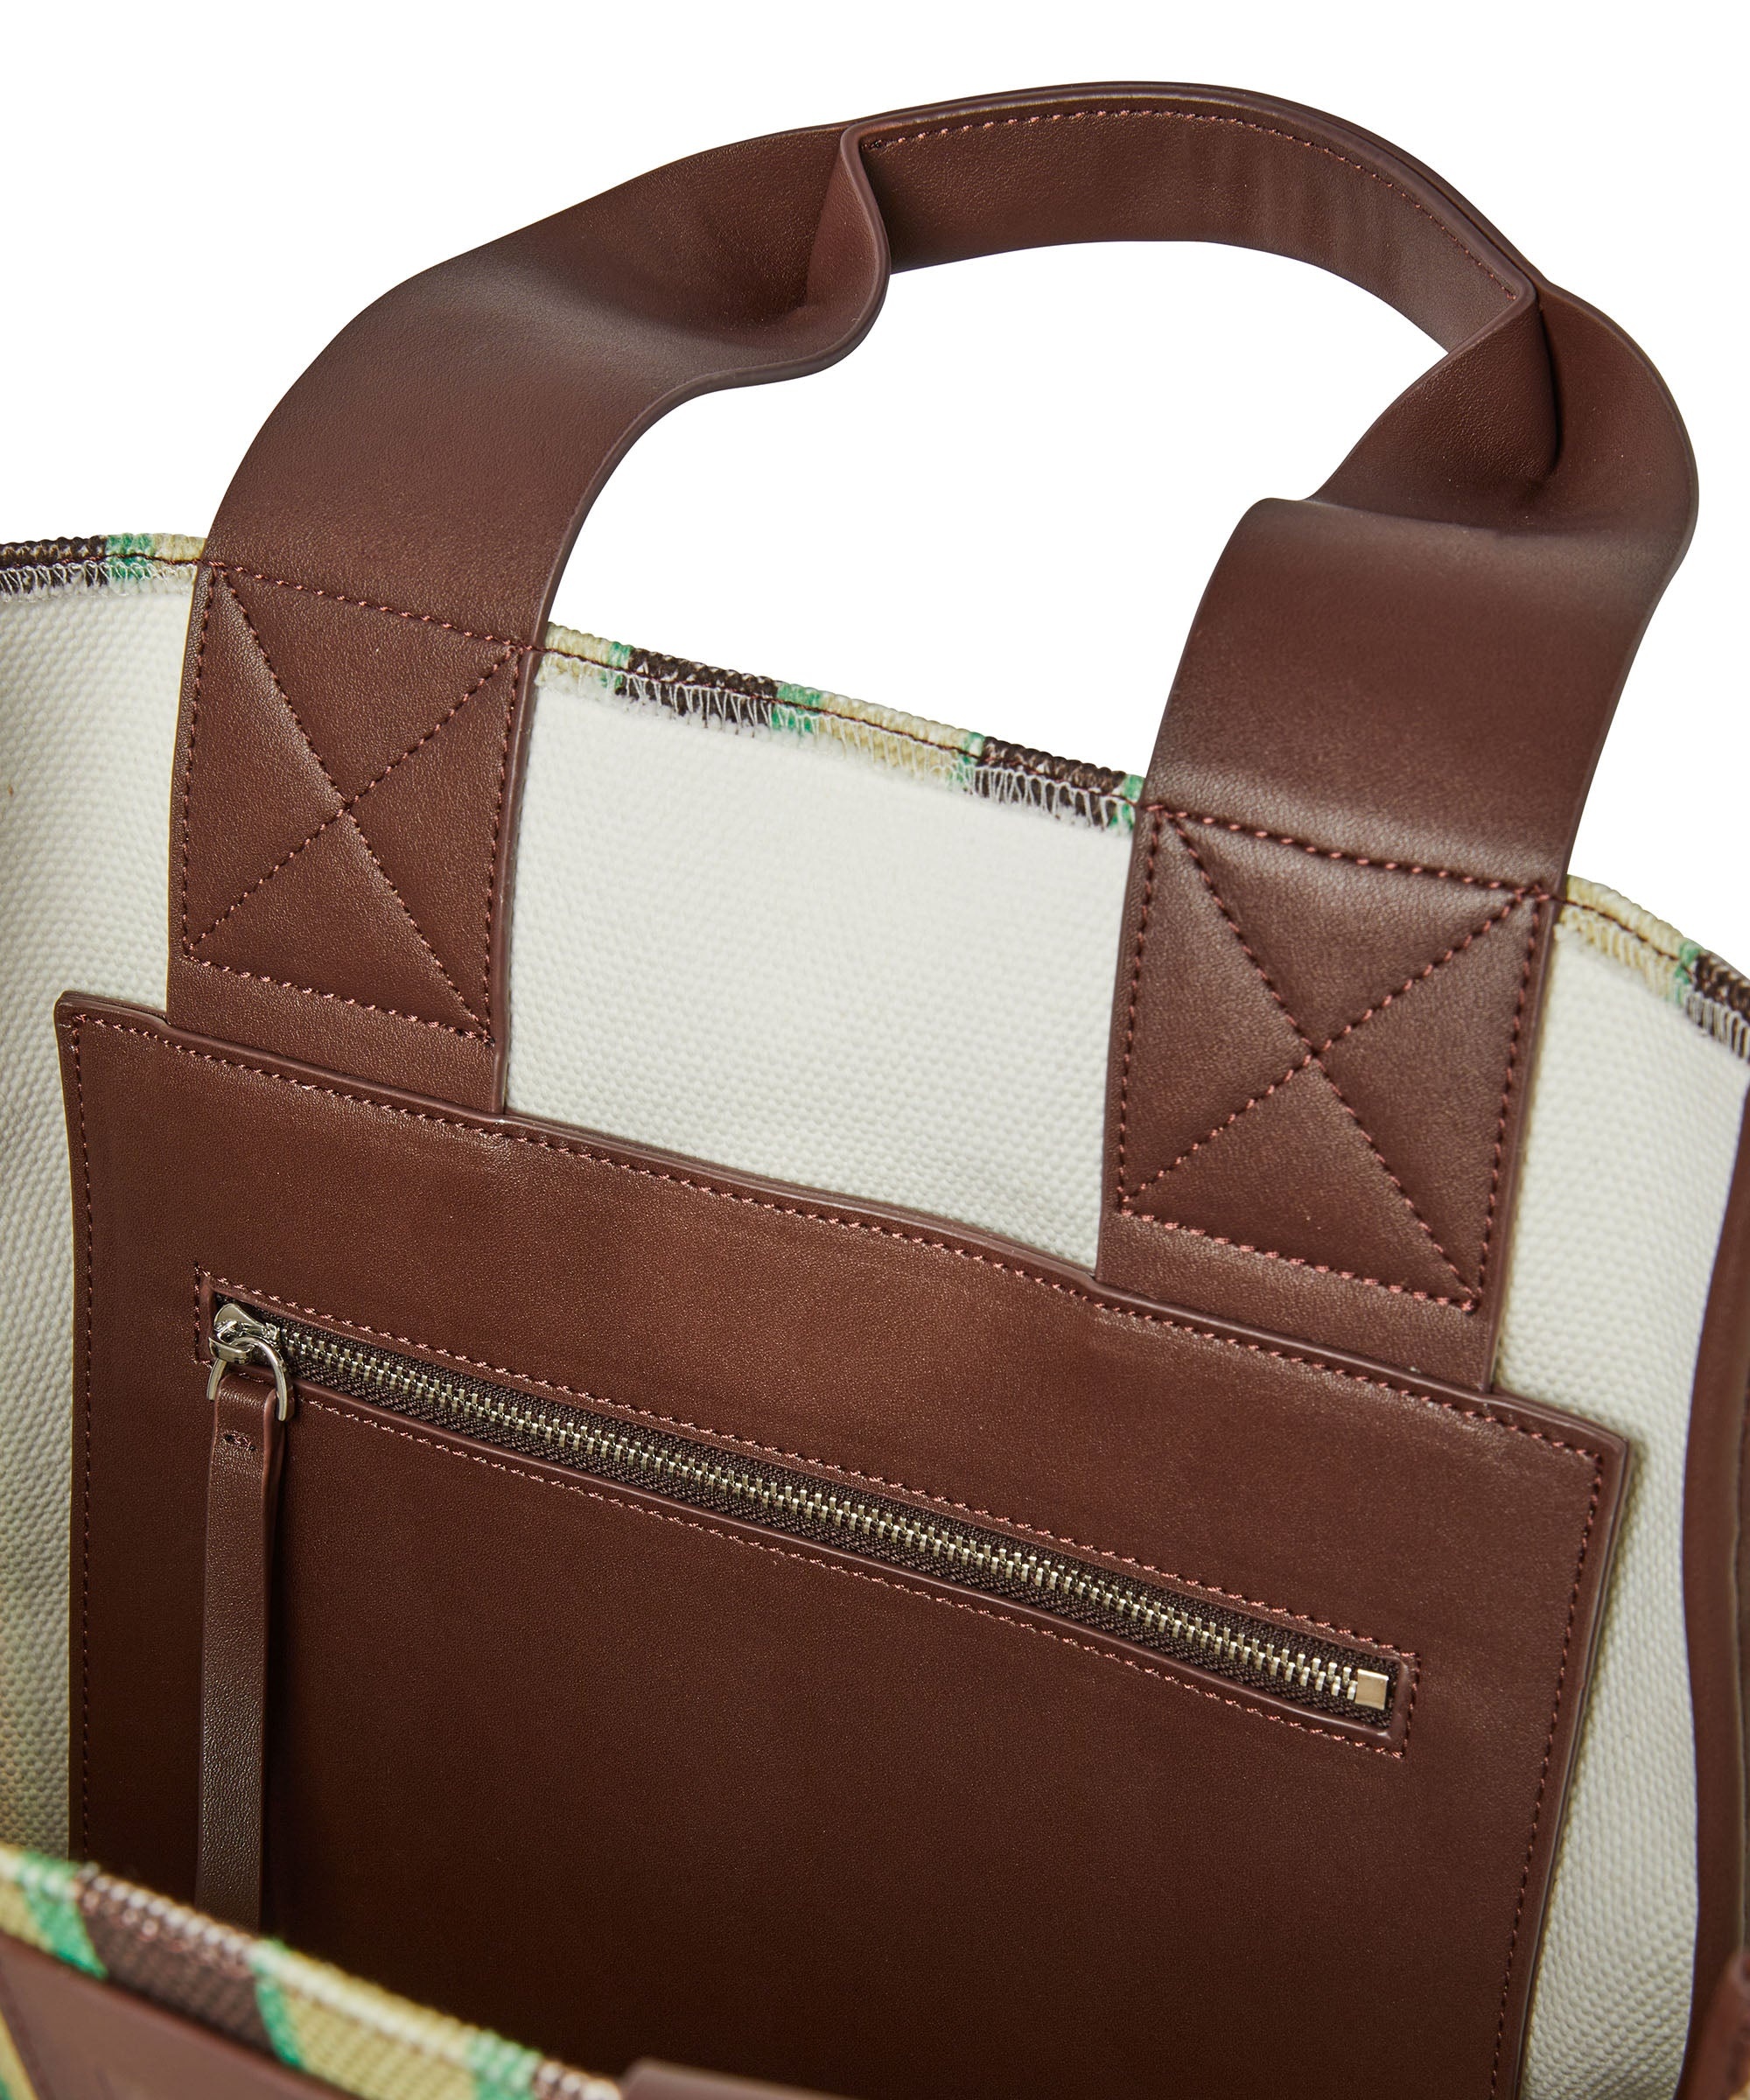 Striped cotton tote bag with leather handles - 4